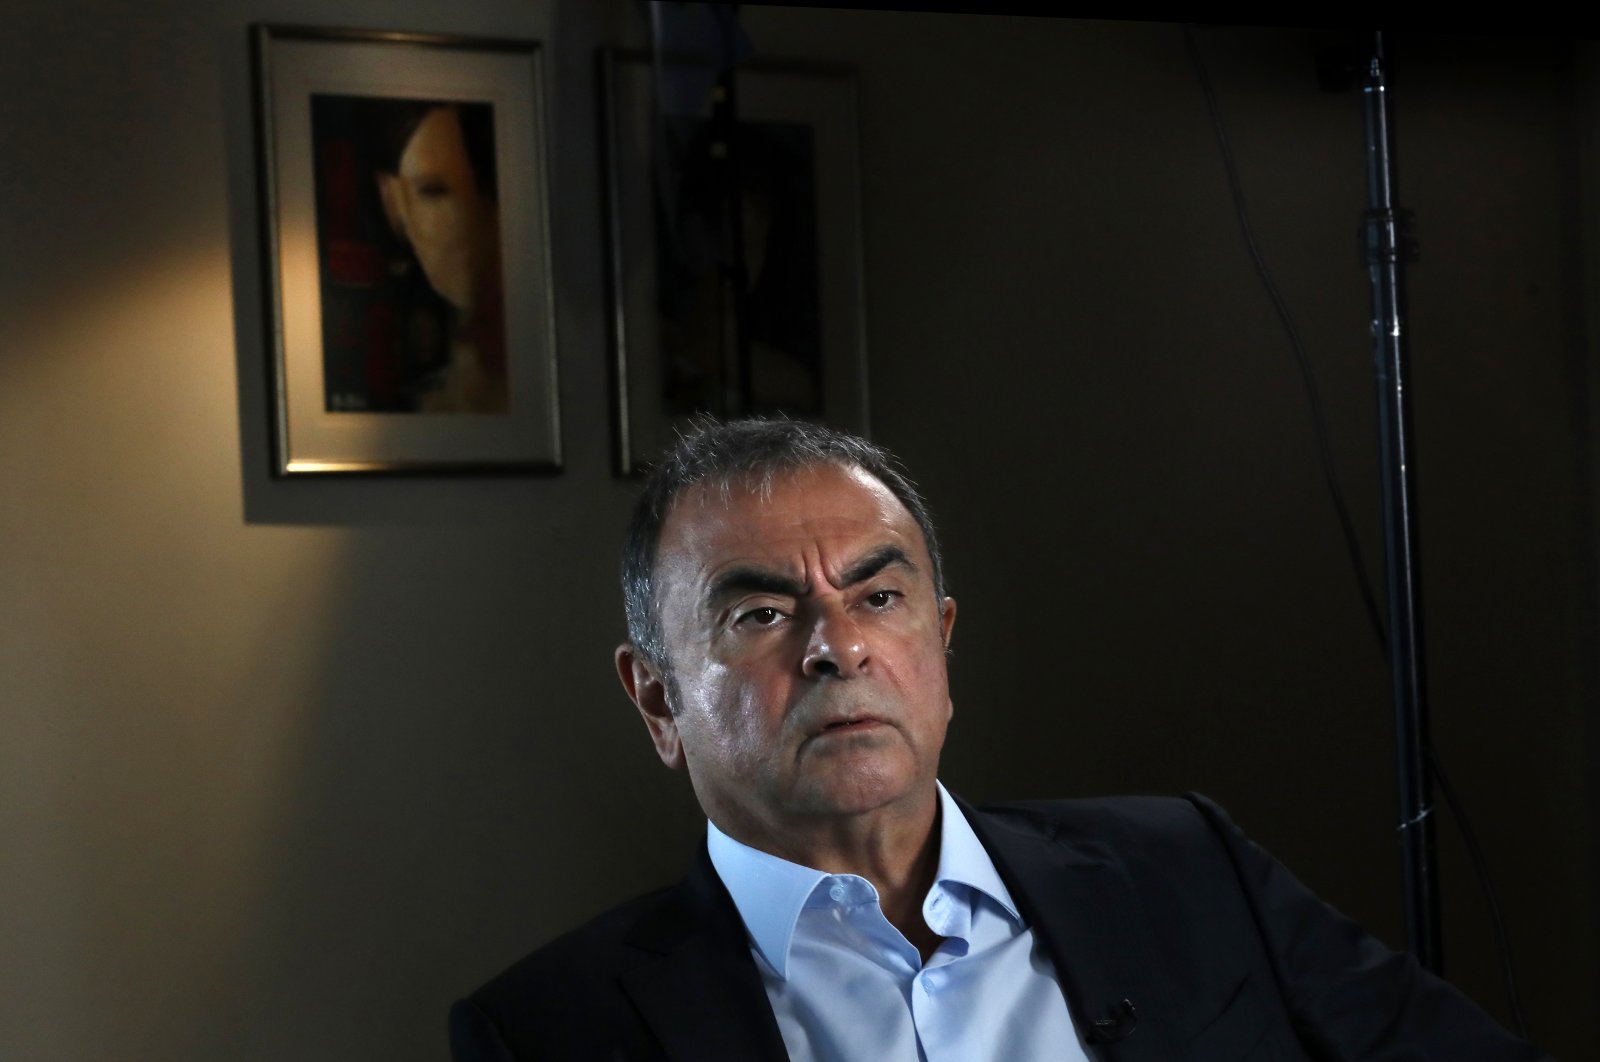 Former Nissan executive Carlos Ghosn speaks during an interview with The Associated Press, in Dbayeh, north of Beirut, Lebanon, May 25, 2021. Lebanon received from Interpol a wanted notice for disgraced auto tycoon Carlos Ghosn on May 19, 2022, four weeks after French prosecutors issued an international arrest warrant for him, Lebanese judicial officials said. (AP File Photo)